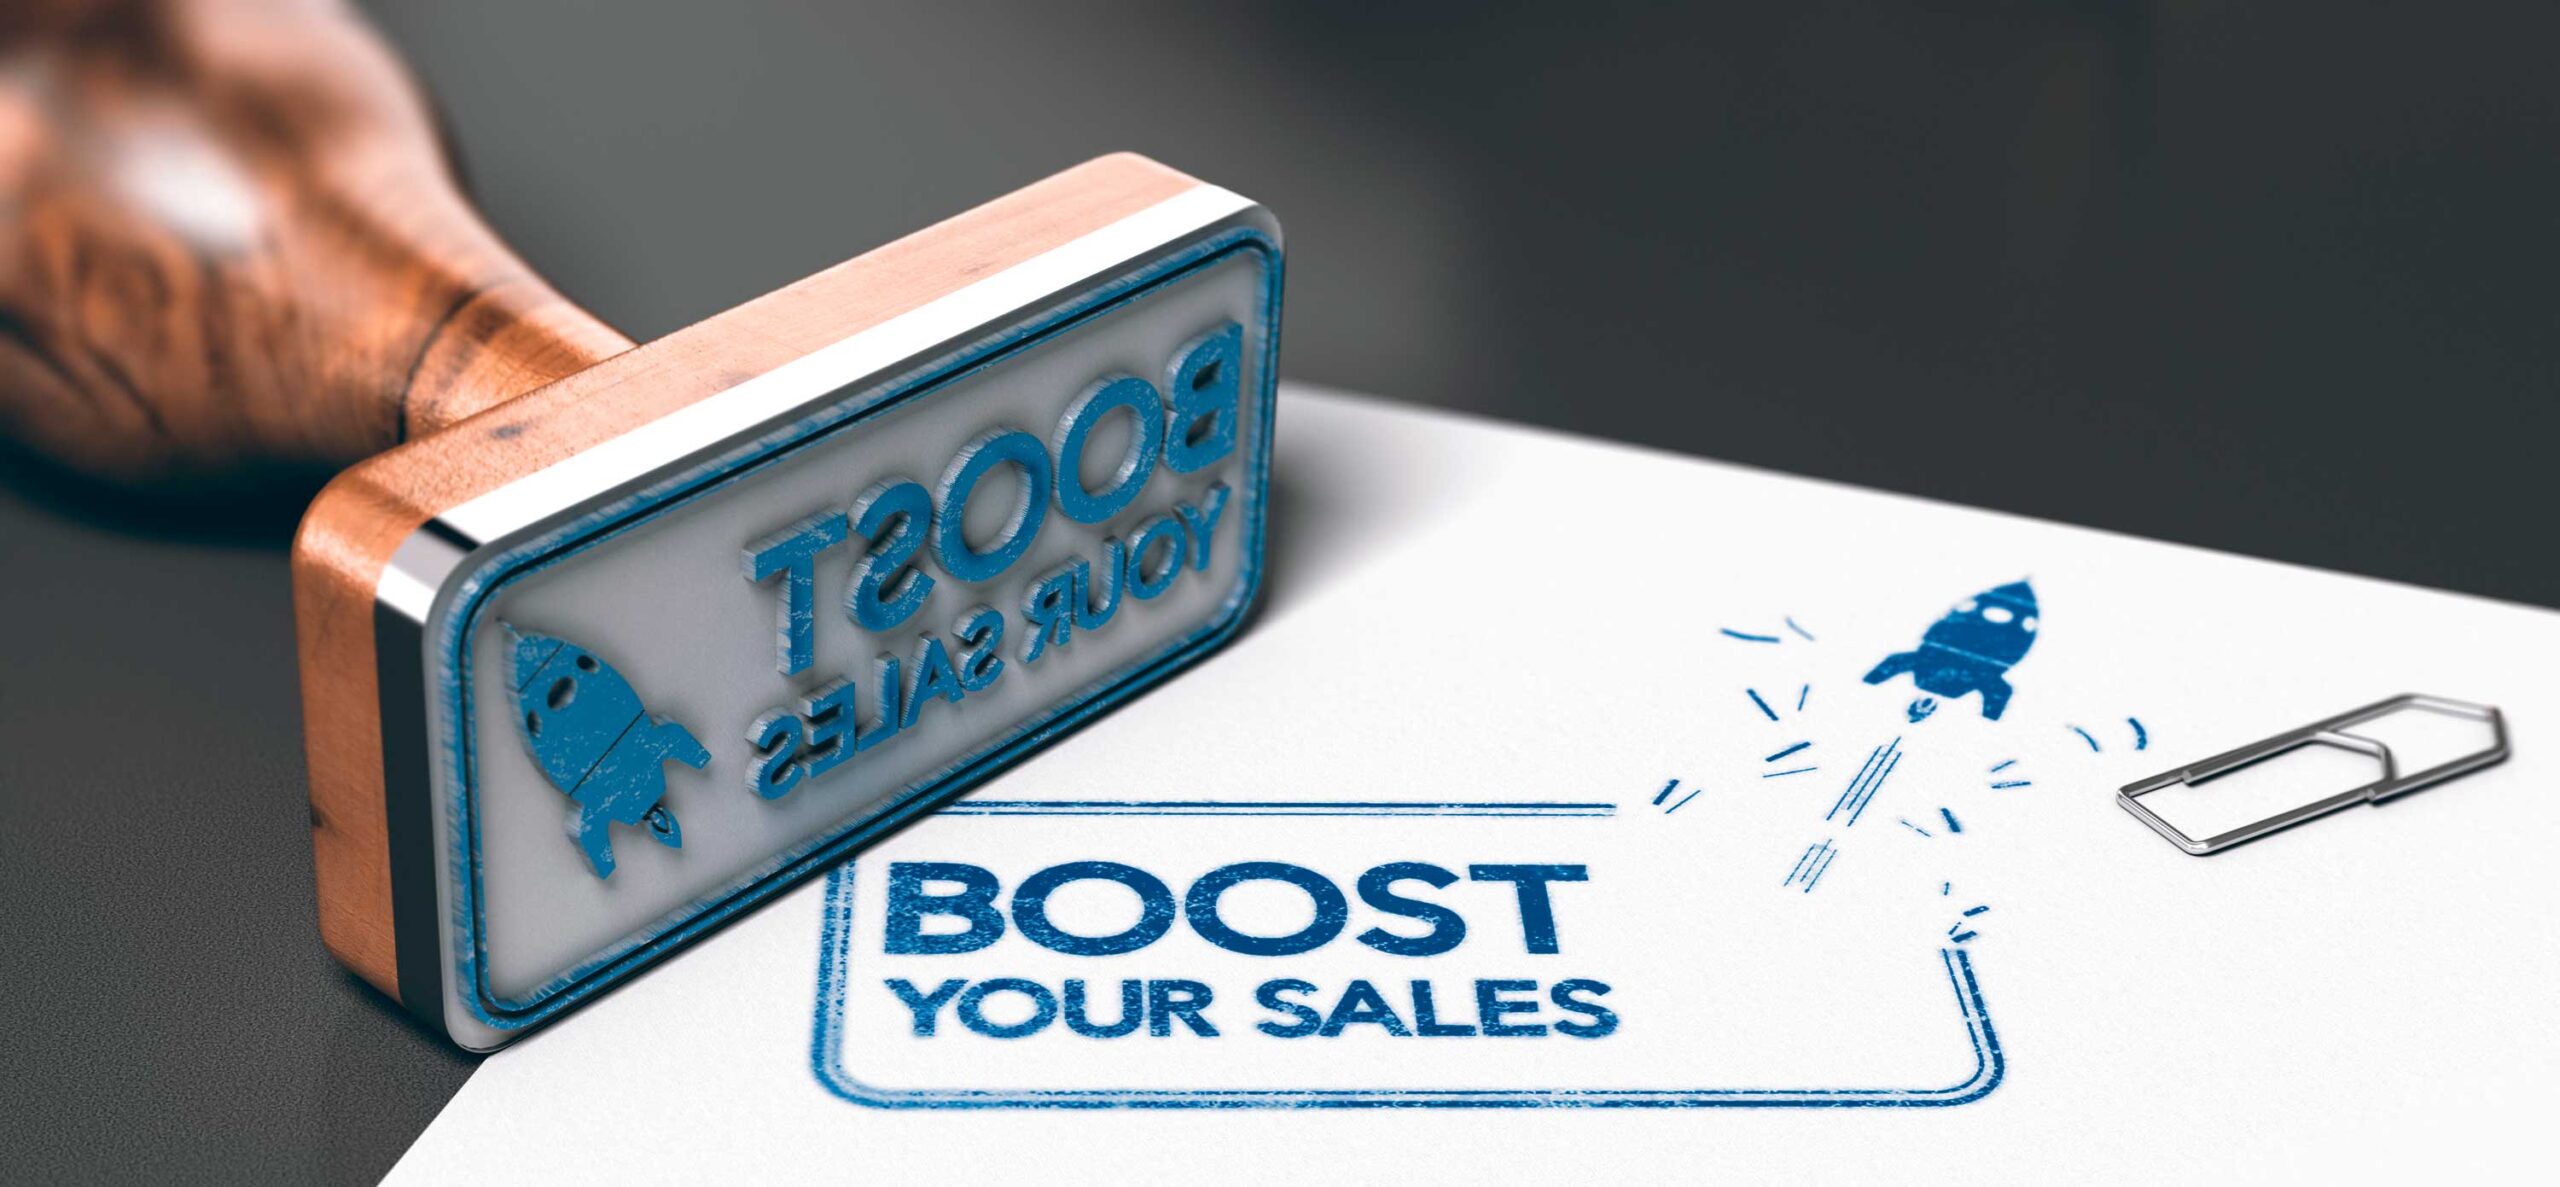 Boost-your-sales